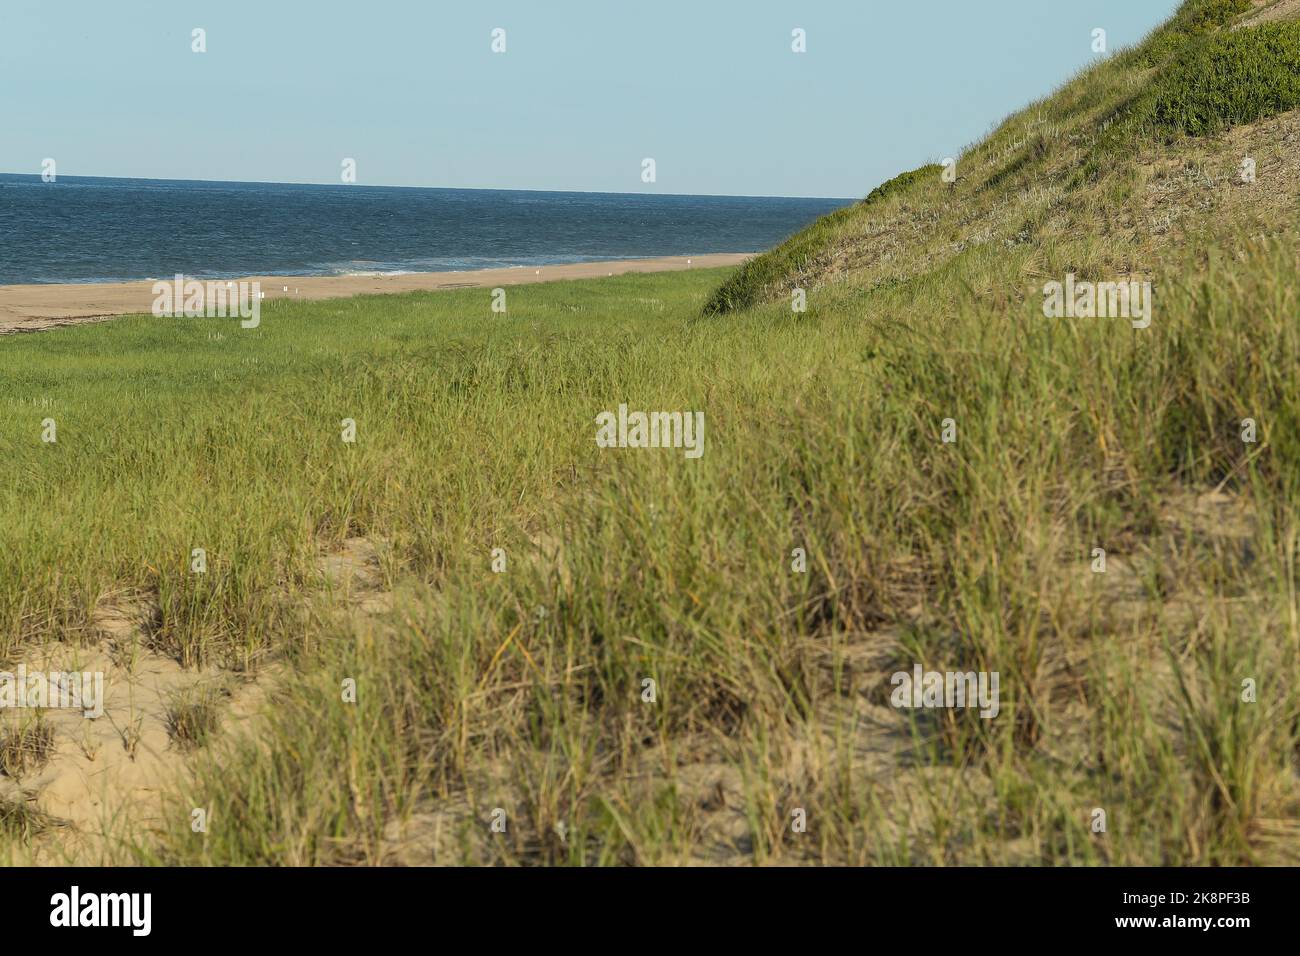 This beach is part of The Cape Cod National Seashore in Eastham, Massachusetts. It opens in mid June-Labor Day. A popular beach in Eastern Massachuset Stock Photo